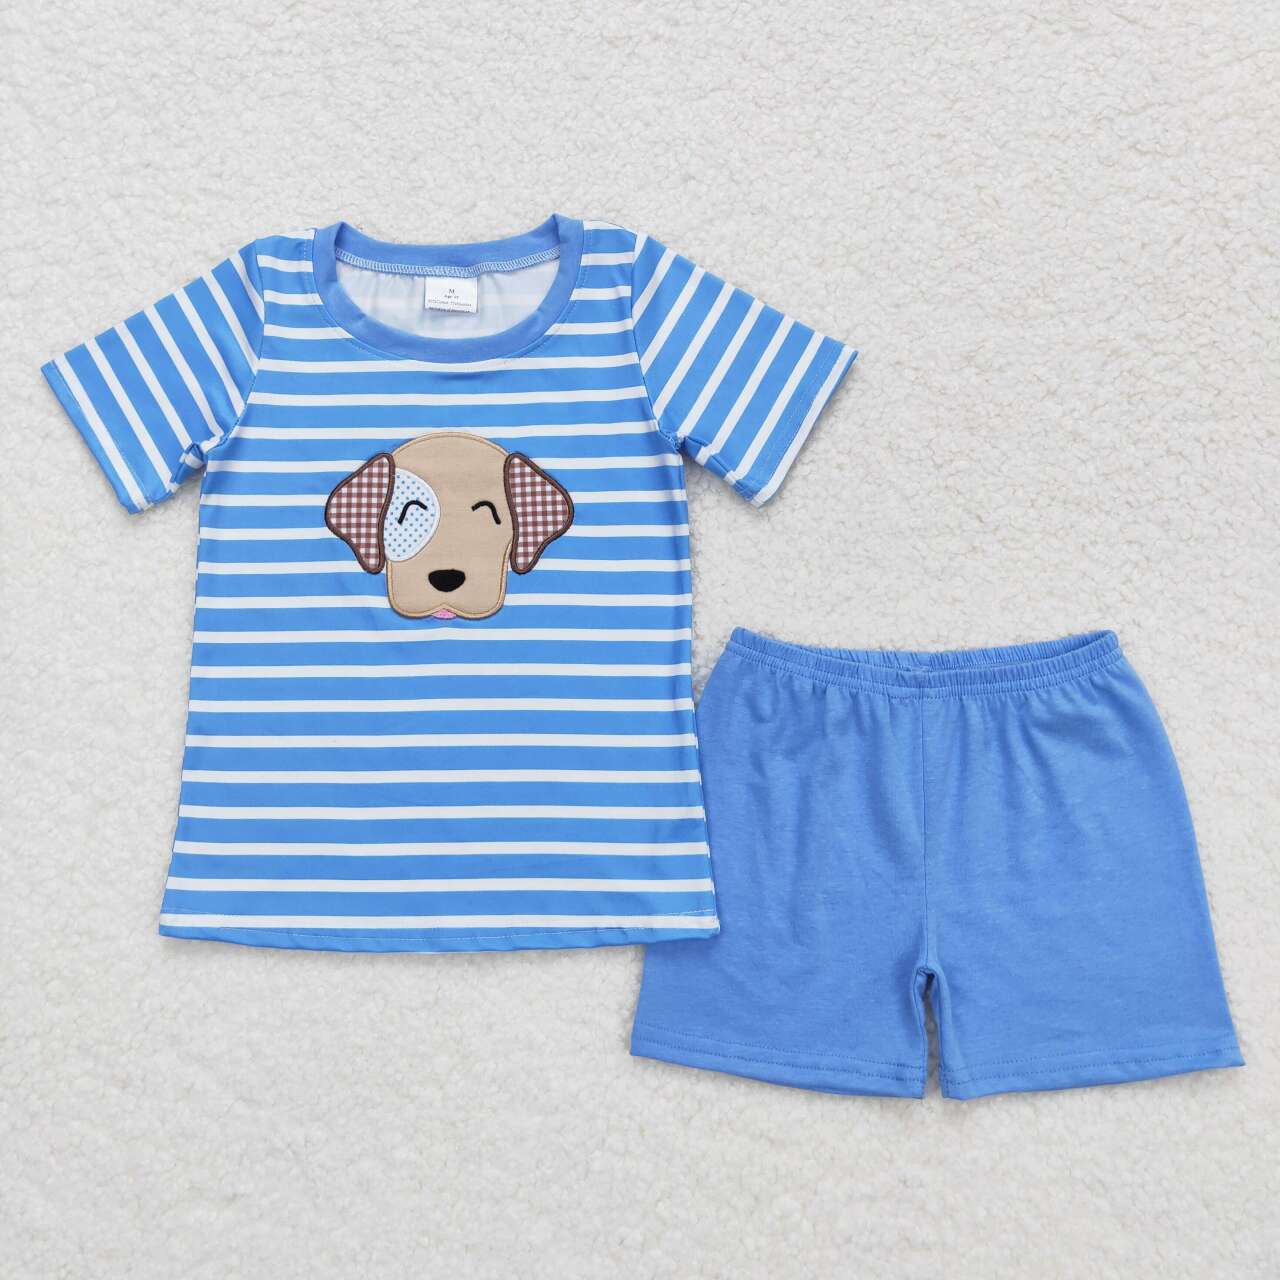 blue dog embroidery shorts set boys outfits